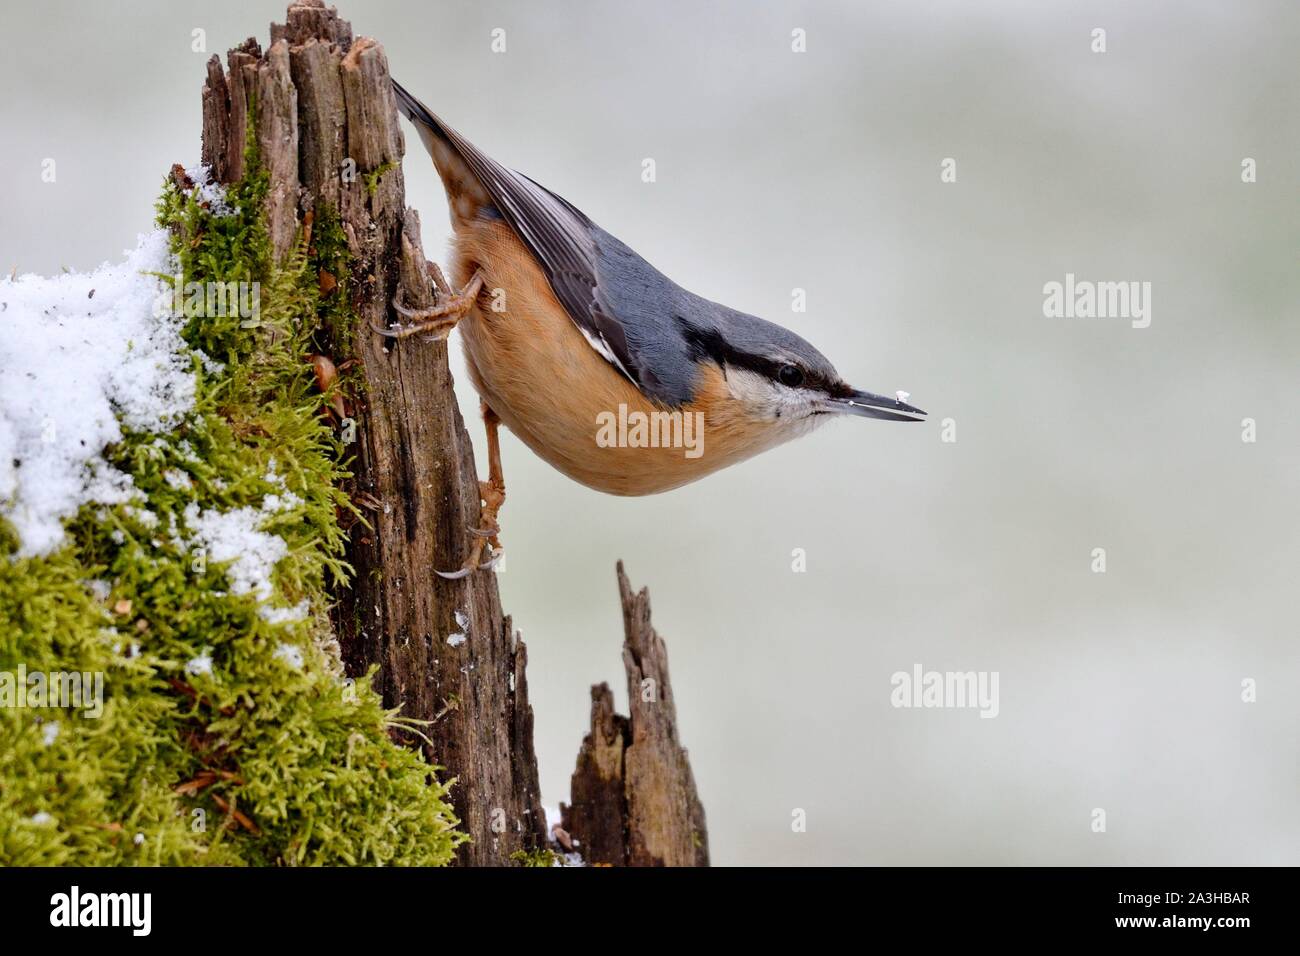 France, Doubs, bird, Sitelle torchepot (Sitta europaea) perched on a root in winter Stock Photo